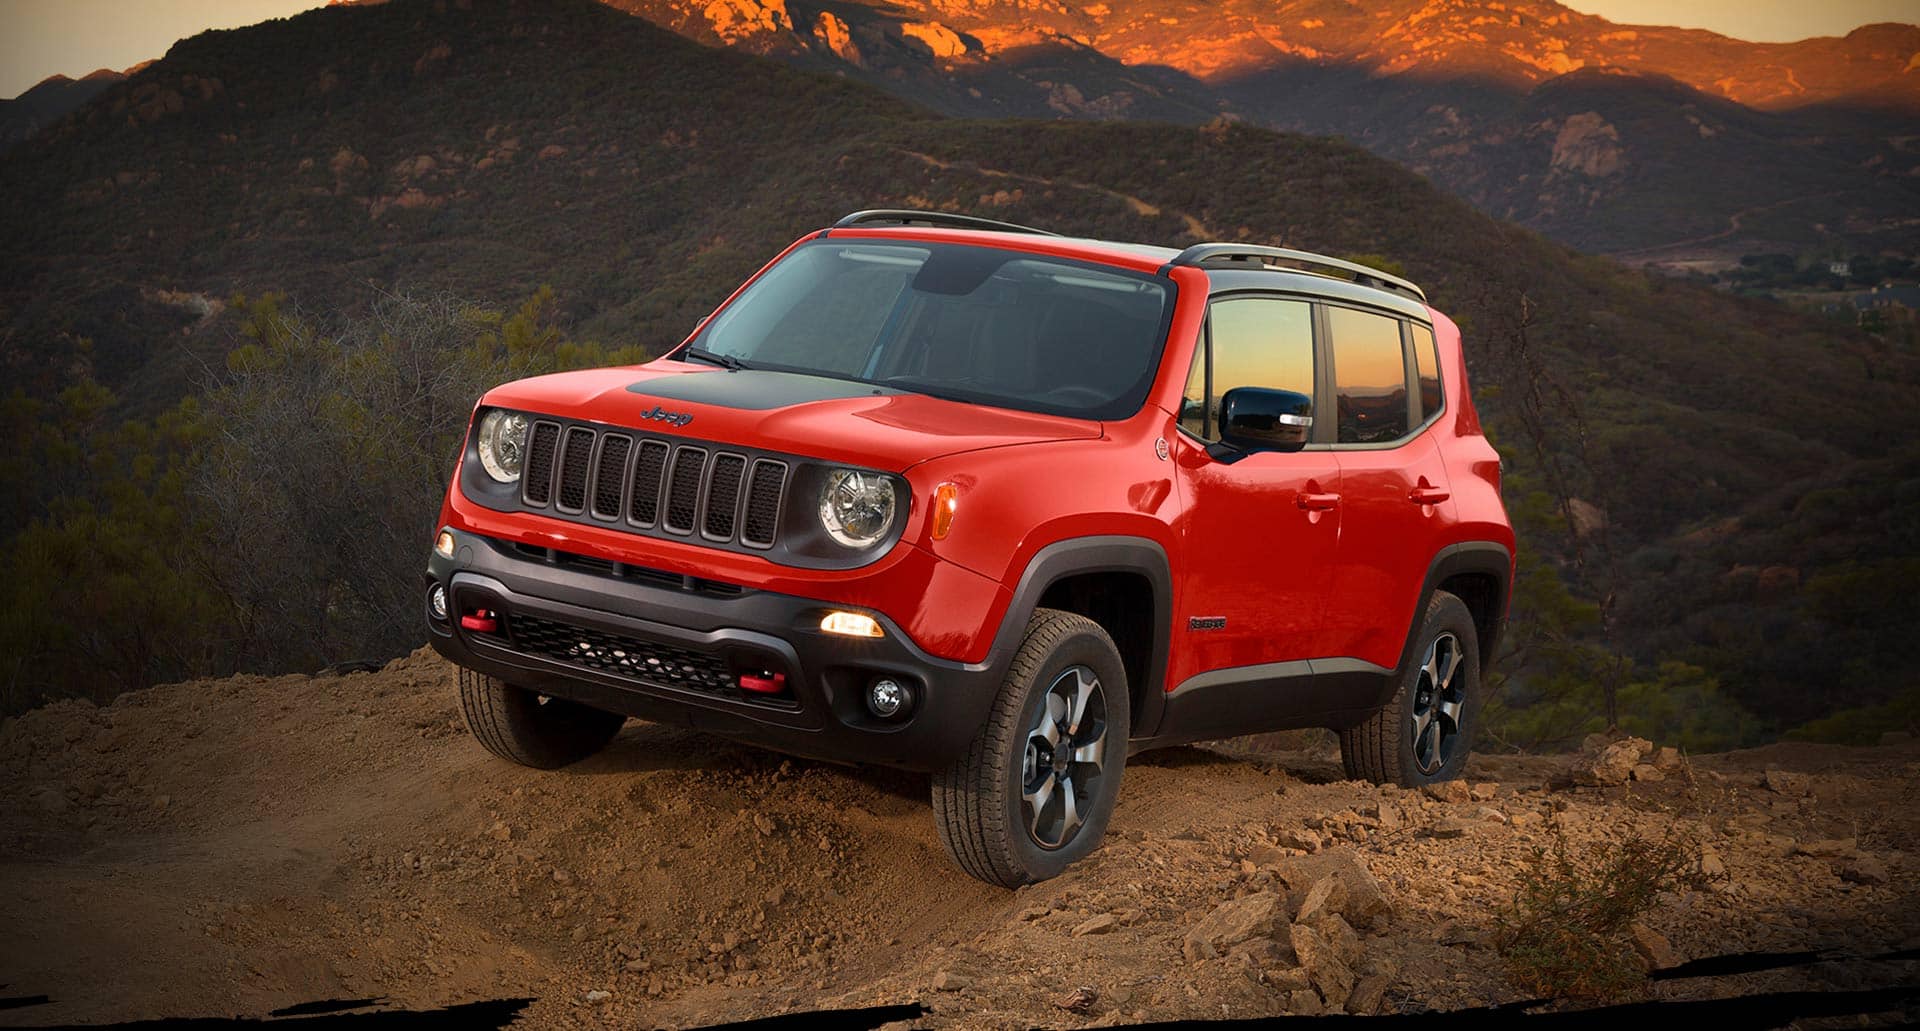 The 2022 Jeep Renegade Trailhawk parked on a dirt track in the mountains at dawn.